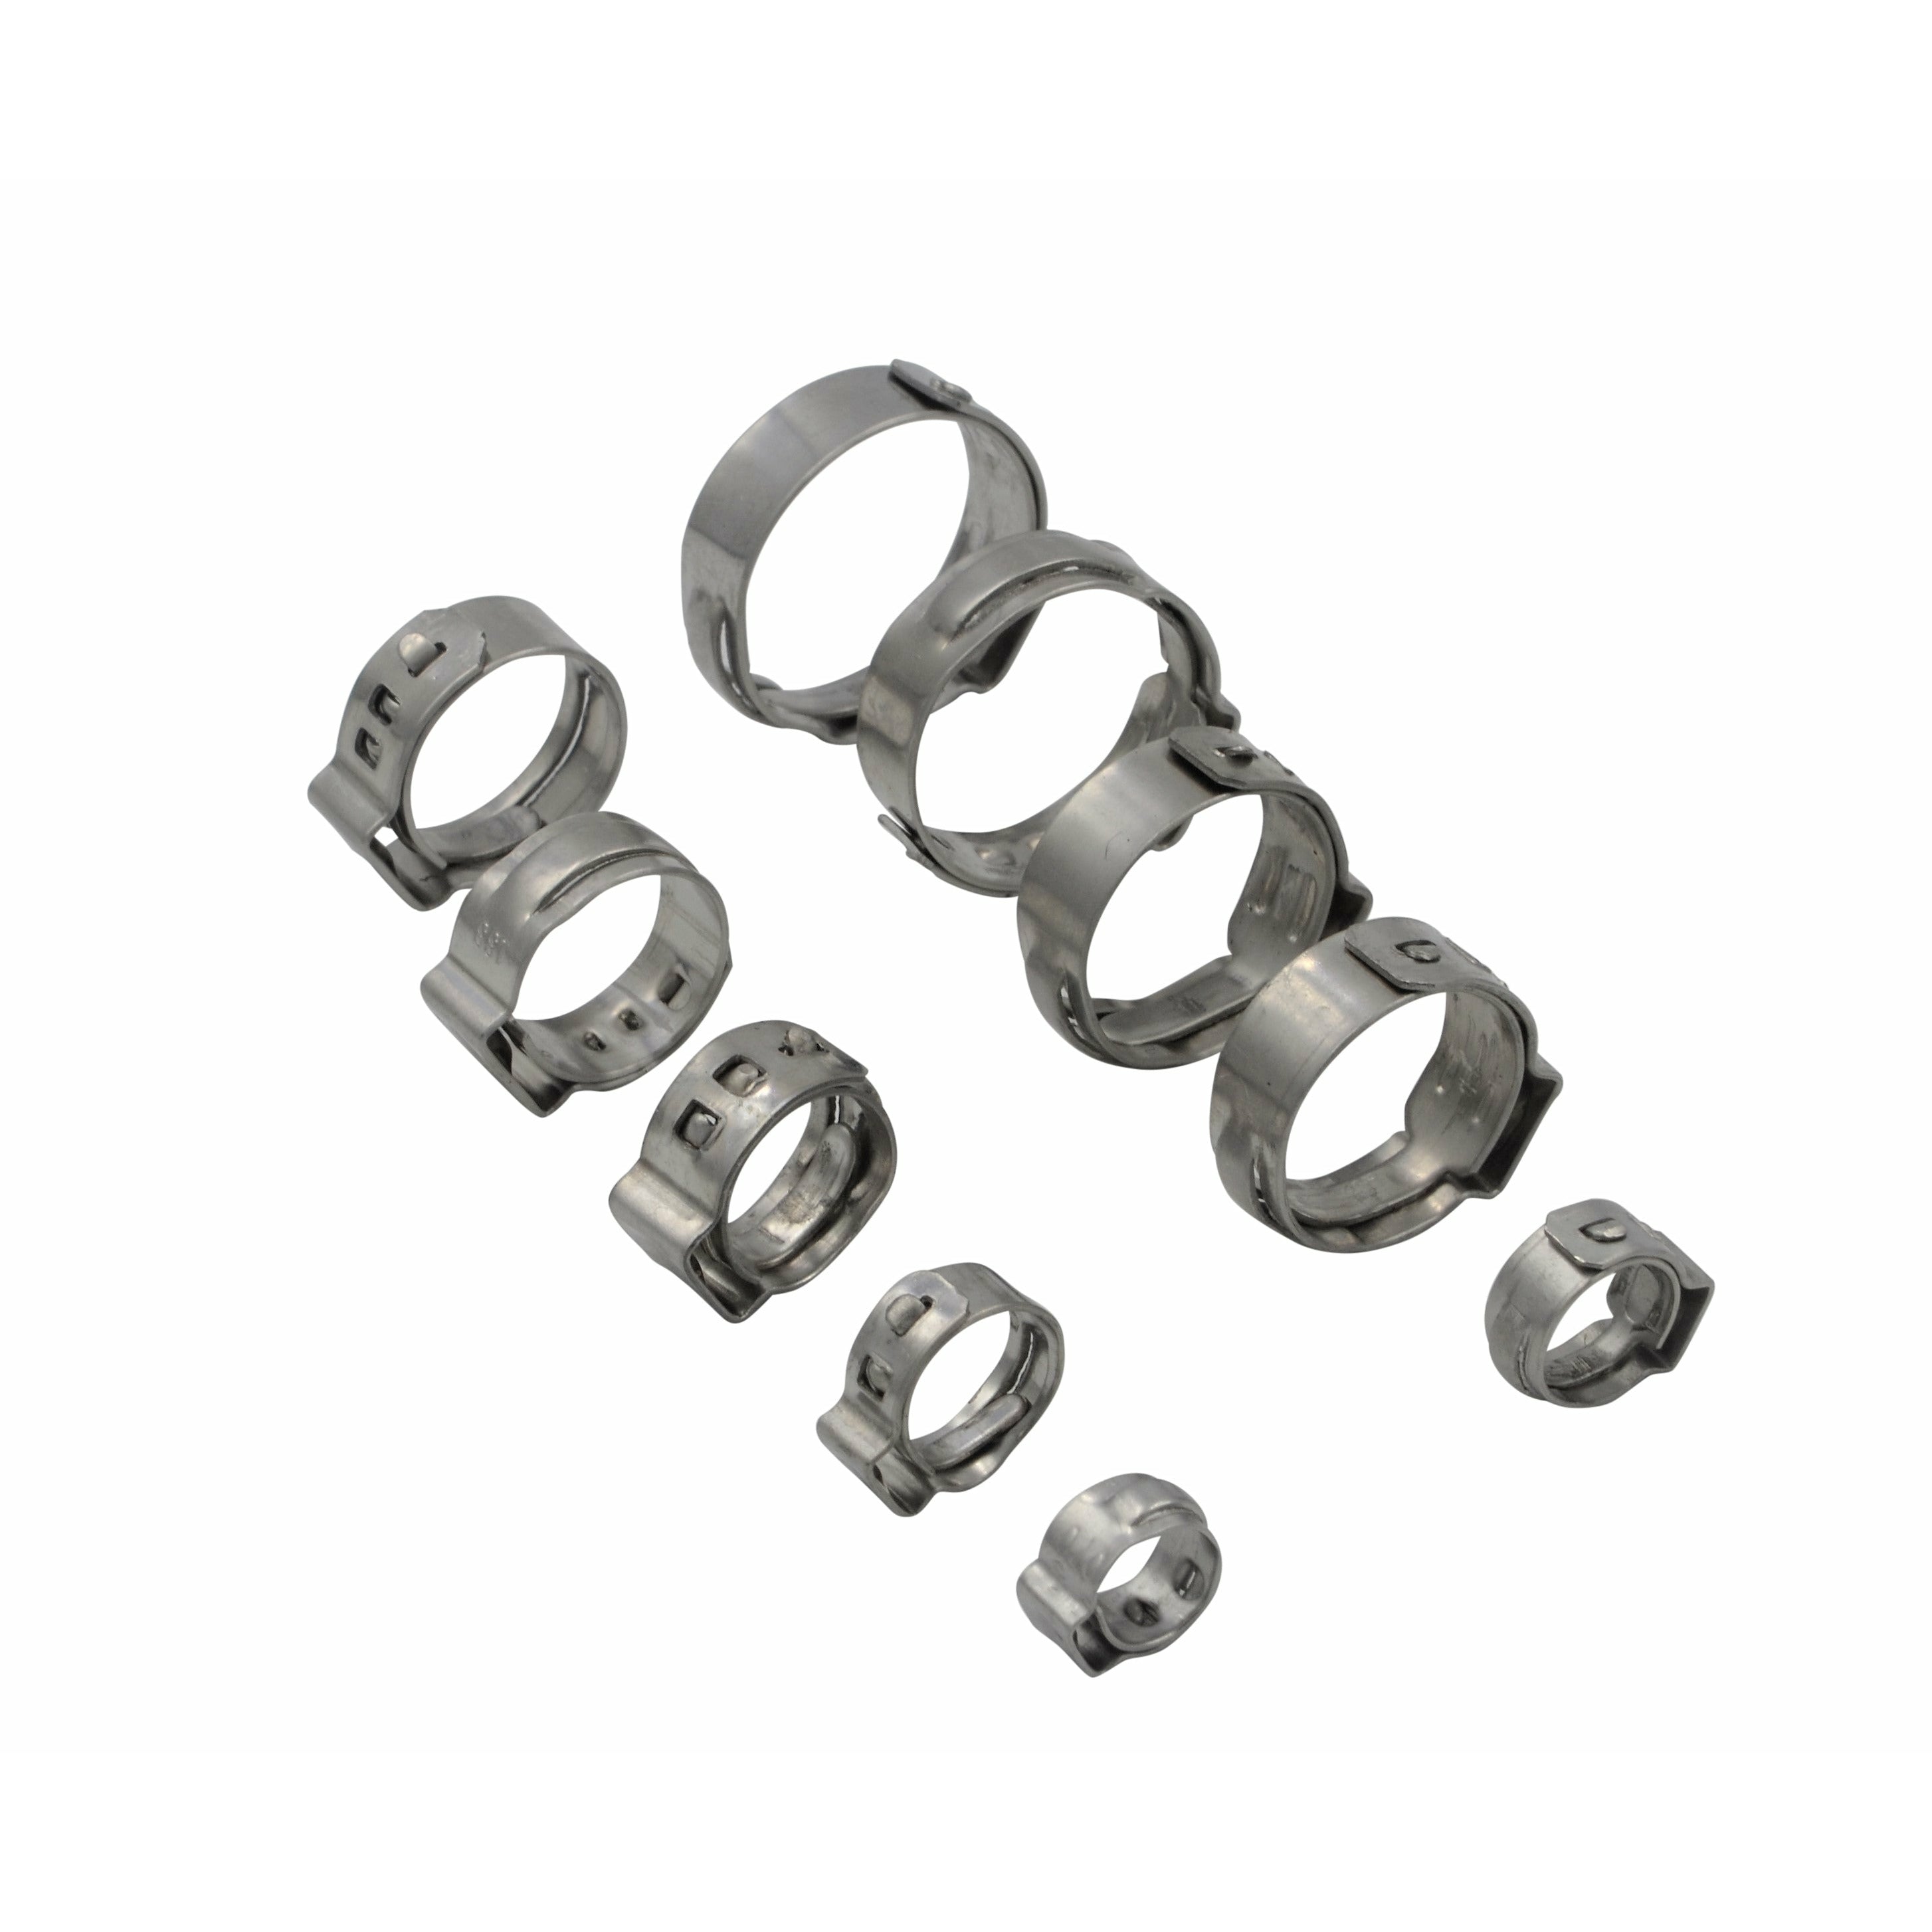 100 Piece 304 Stainless Steel 7.3-9mm Ear Hose Clamp Grab Kit Assortment